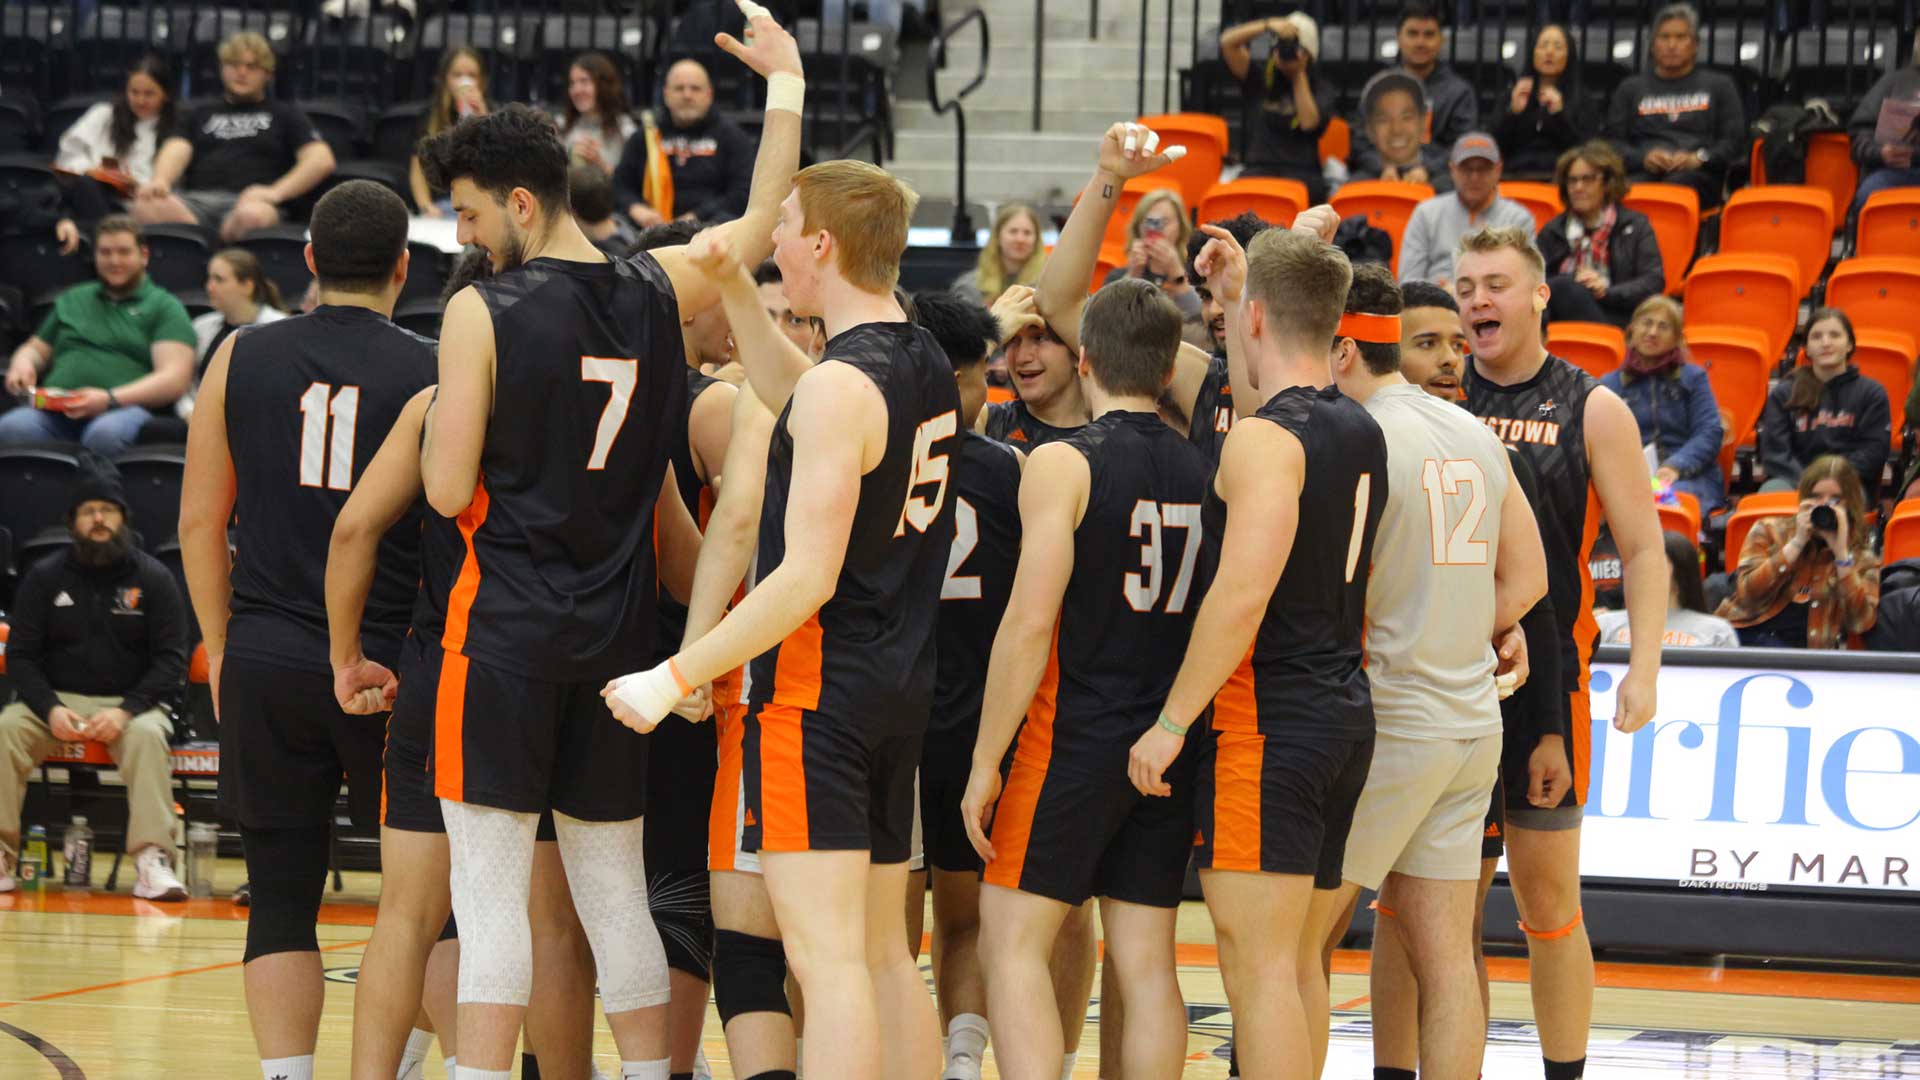 Jimmies sweep Cardinal Stritch for win number 13